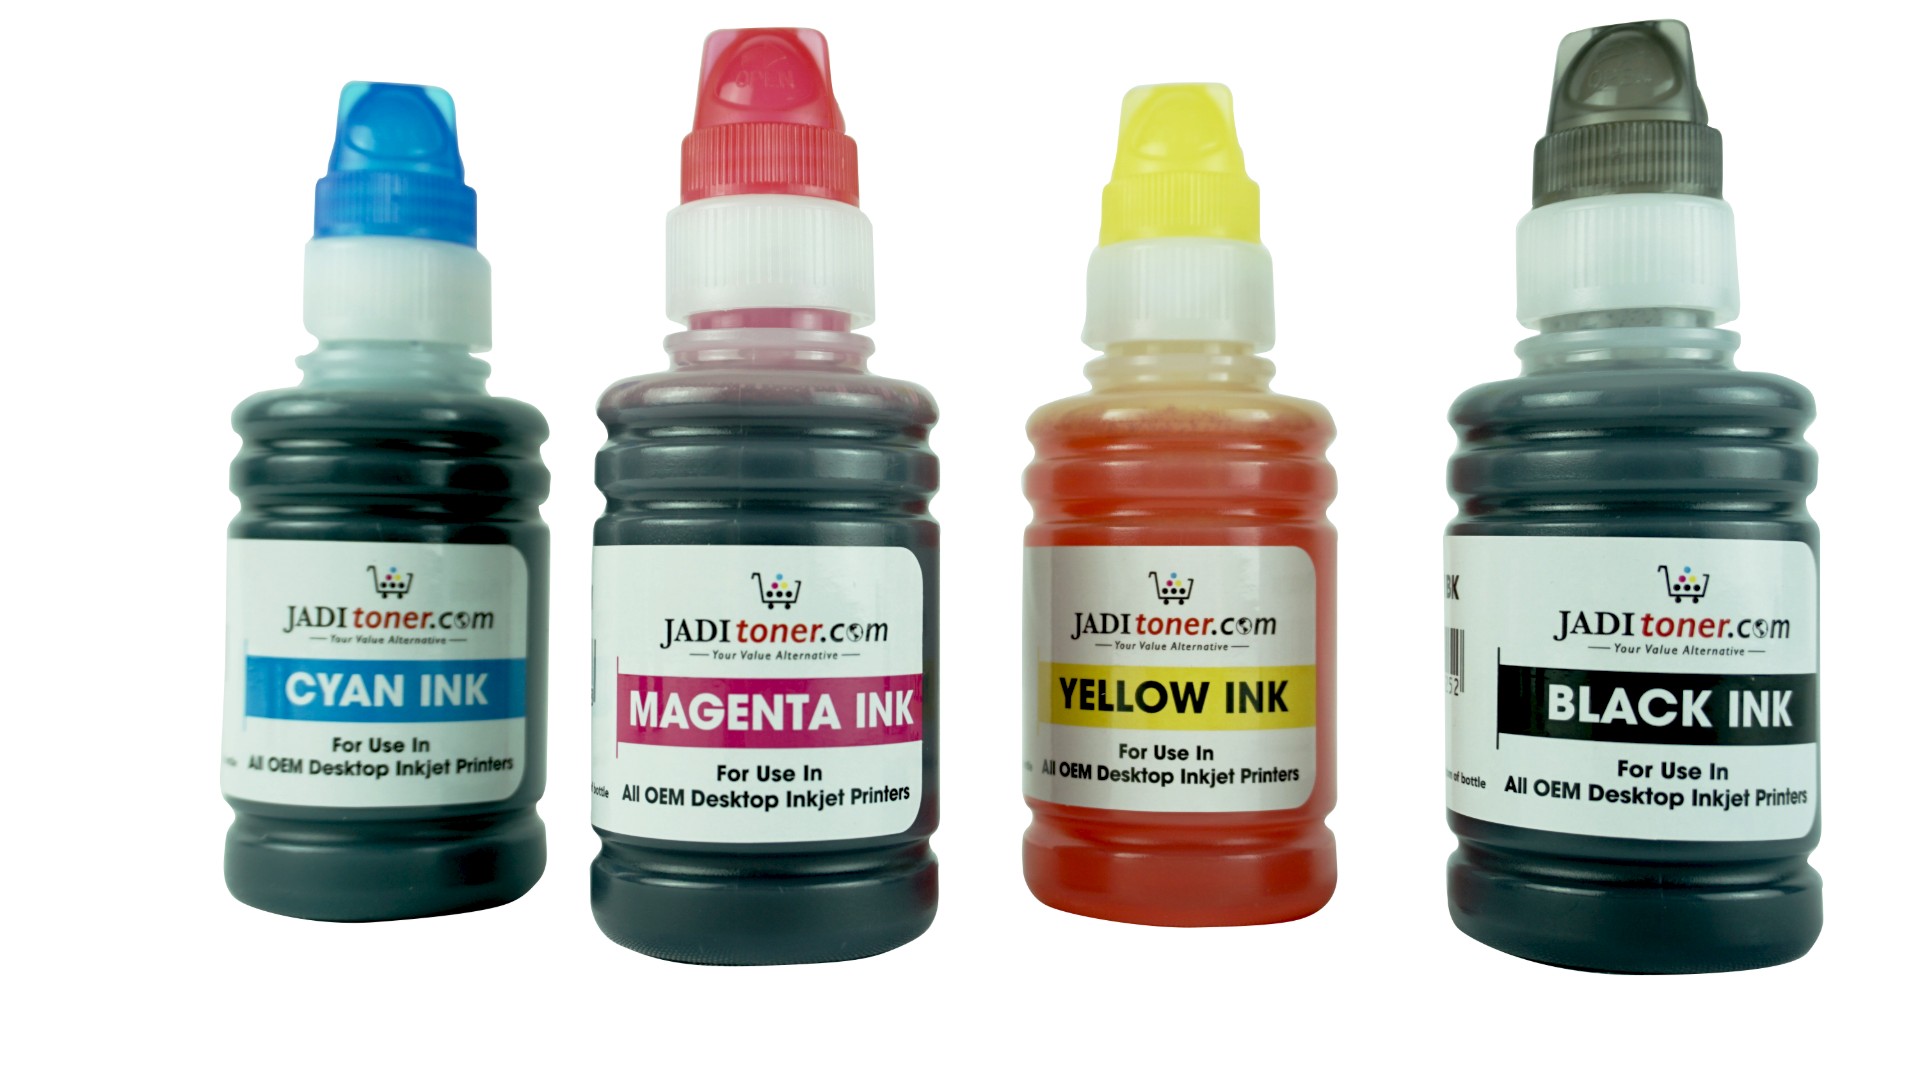 Refill Ink (CYMK Set - 100ml) For Use In Epson / HP / Canon / Brother Inkjet and Deskjet Printer (UNIVERSAL)